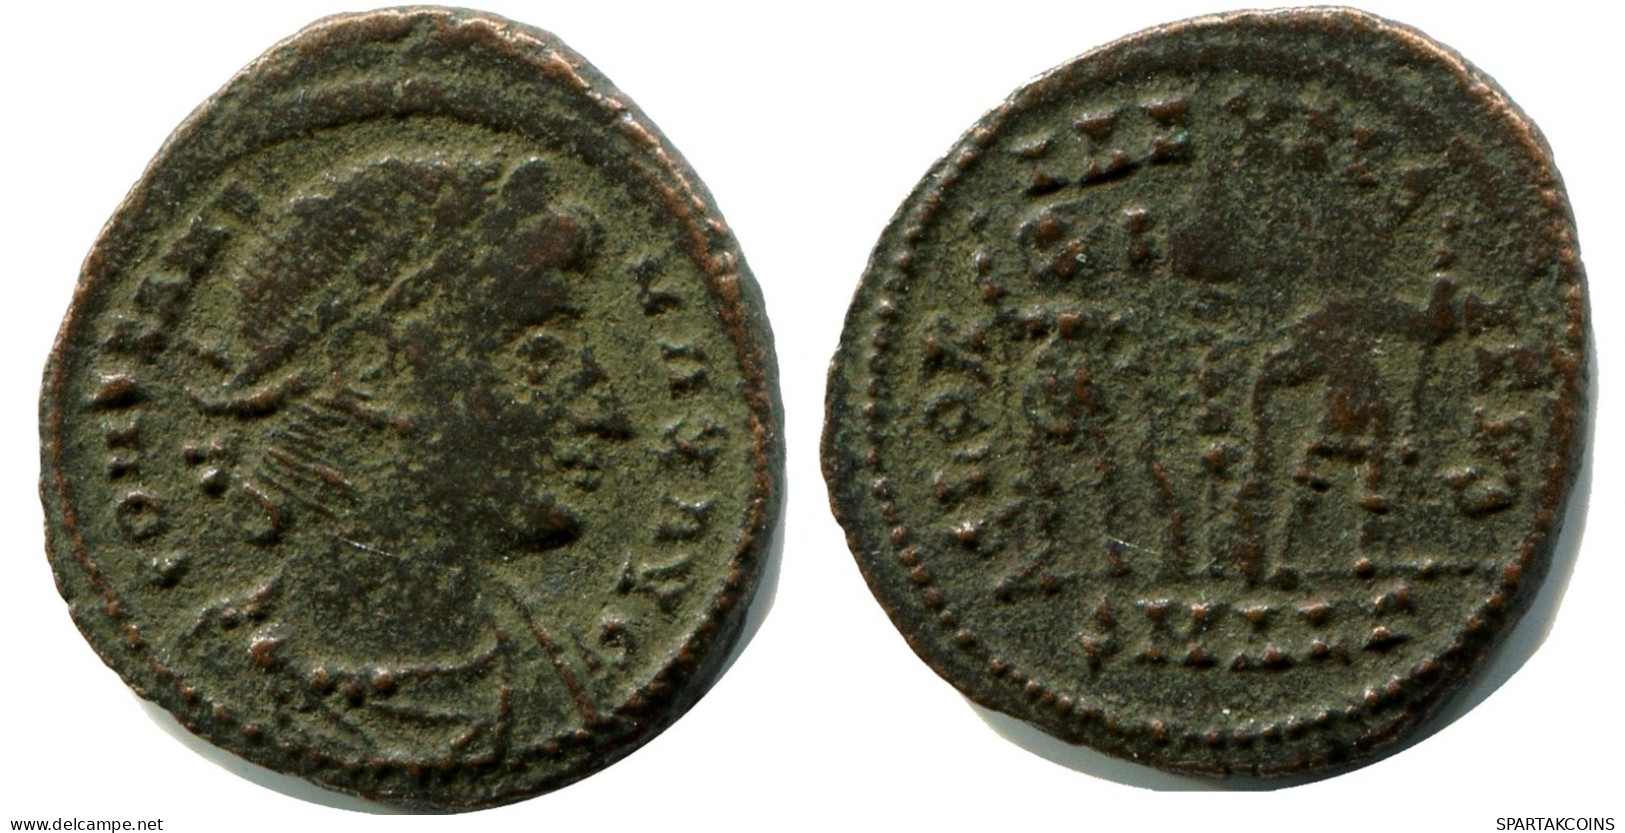 CONSTANS MINTED IN ALEKSANDRIA FOUND IN IHNASYAH HOARD EGYPT #ANC11406.14.U.A - The Christian Empire (307 AD To 363 AD)